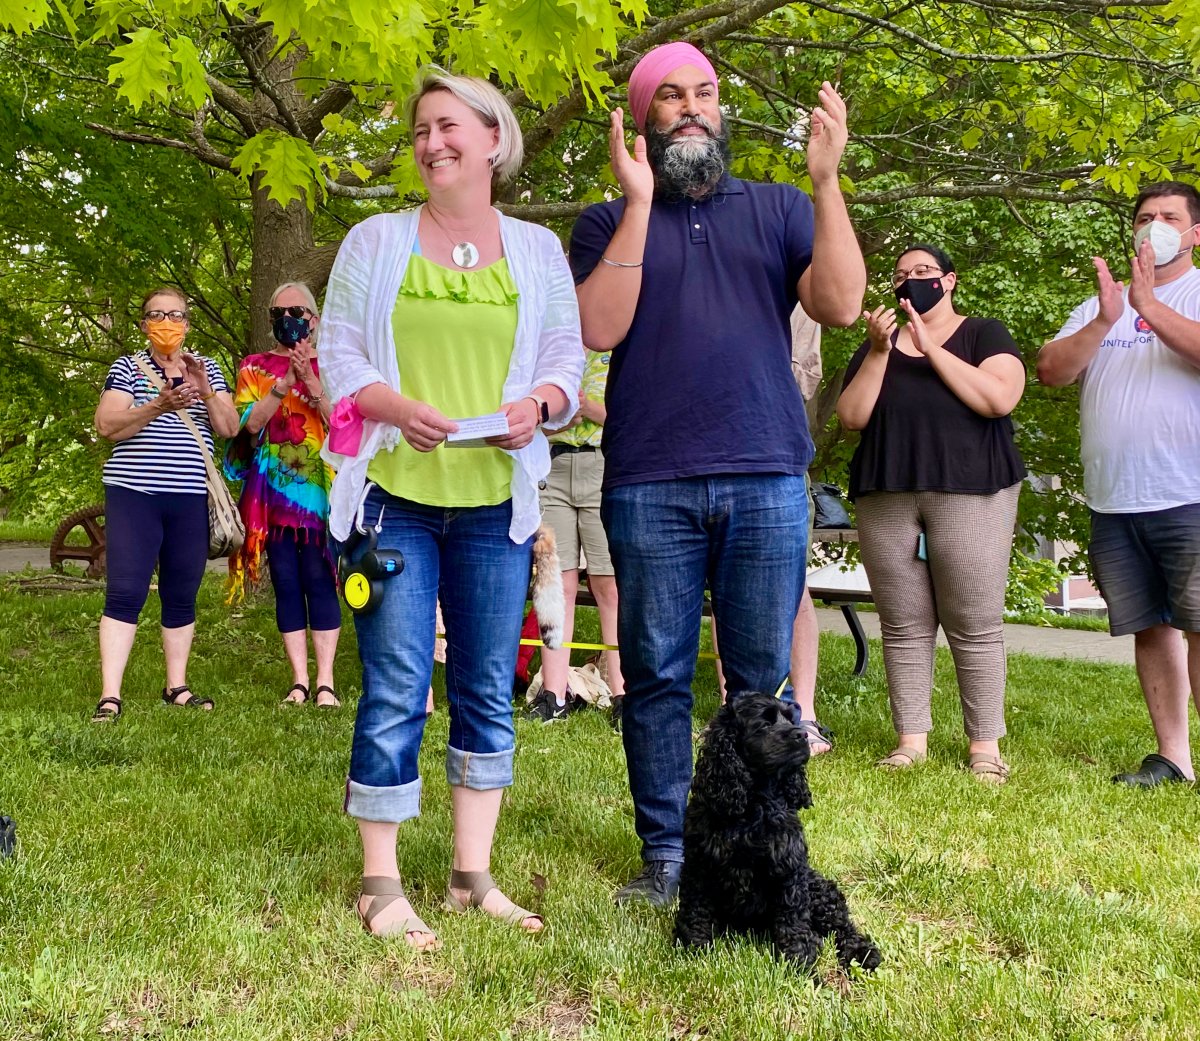 Federal NDP Leader Jagmeet Singh visited Peterborough, Ont., on May 31 to show support for provincial NDP candidate Jenn Deck.